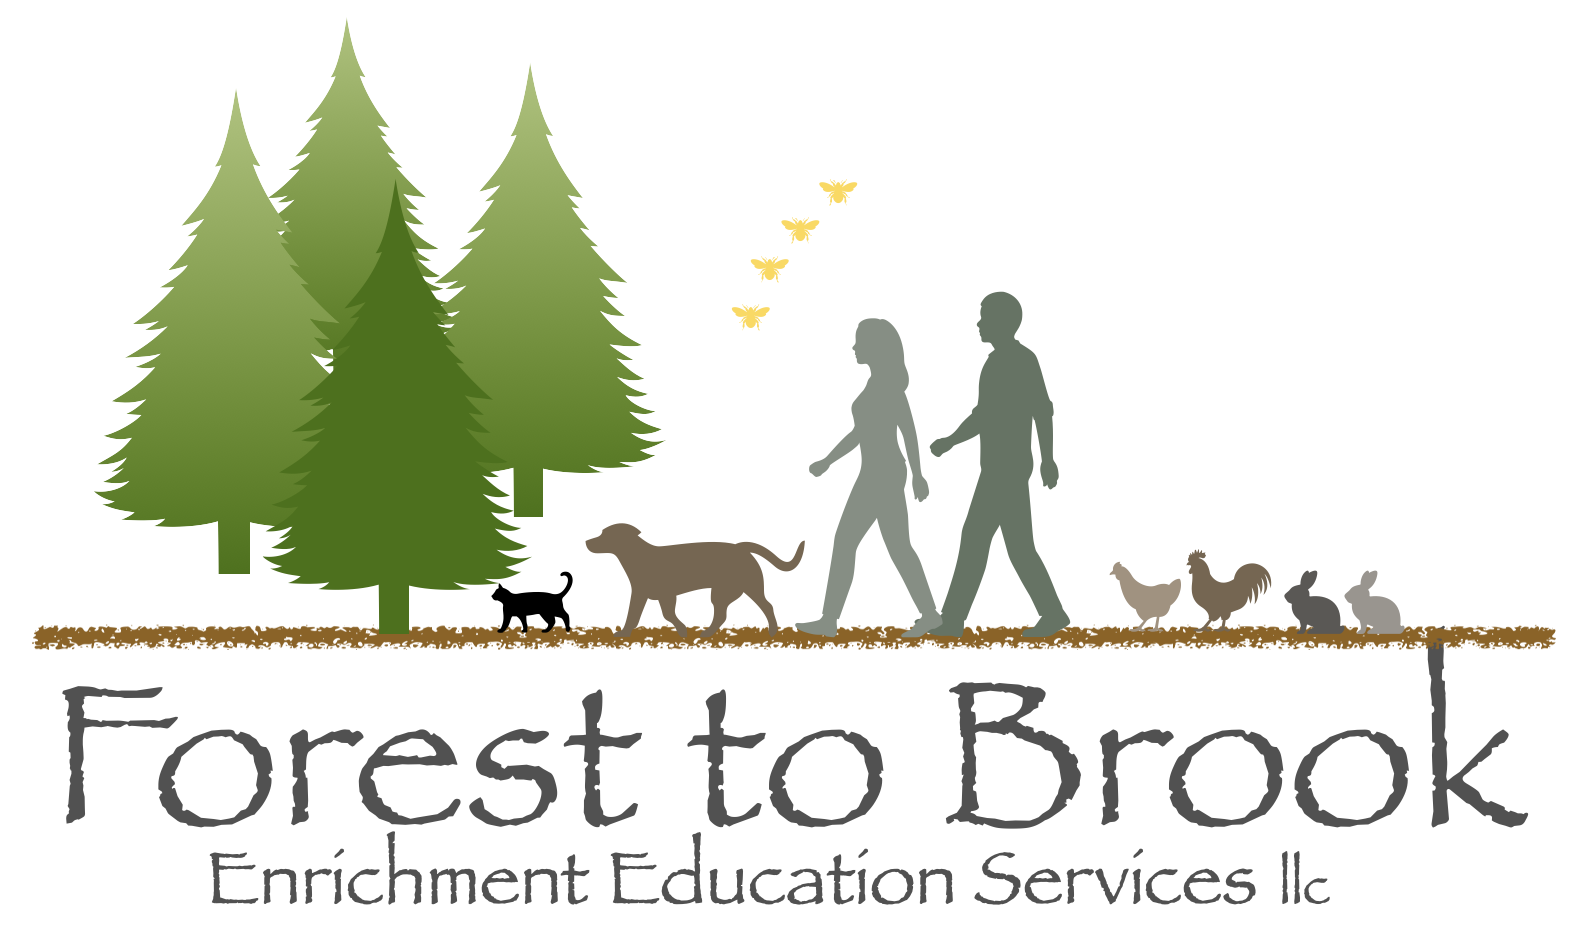 An image here shows the business logo.  The logo is a drawing of pine trees, a cat, a dog, a woman, man, two chickens, and two rabbits are walking toward the trees.  There are several bees flying above.  There is a brown line under their feet representing the ground, the name Forest to Brook Enrichment Education Services LLC is written below.